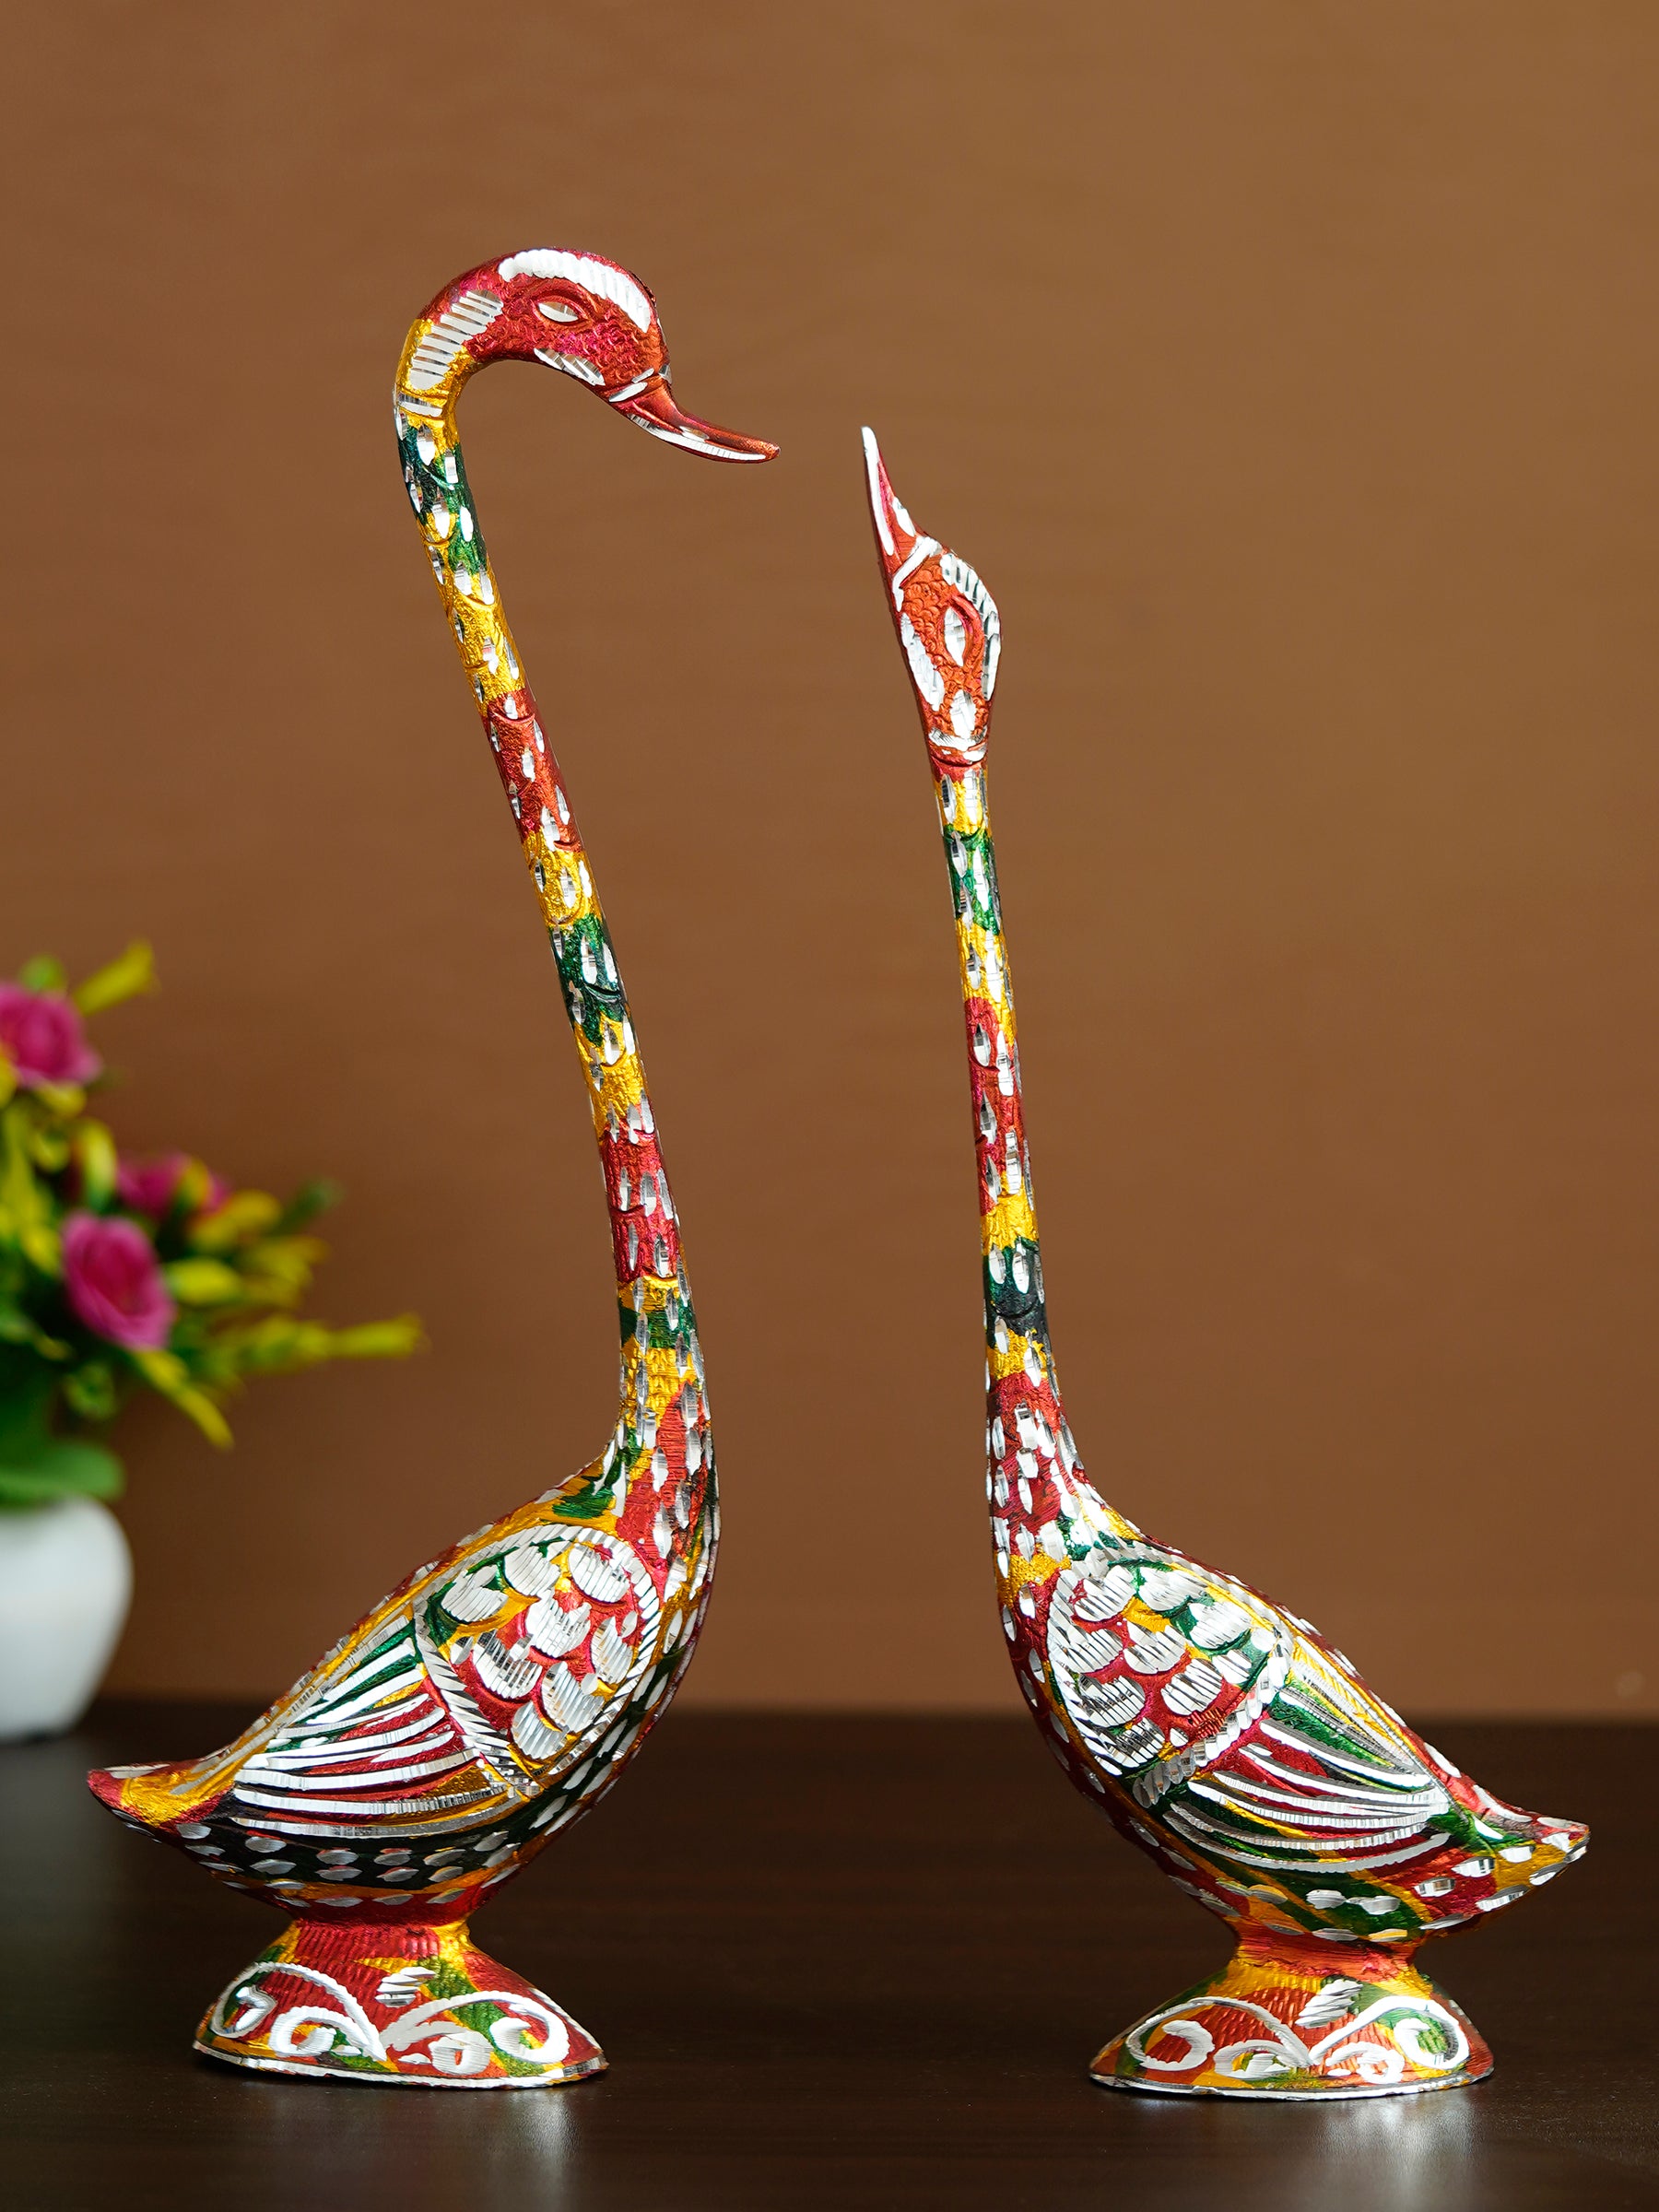 Colorful Metal Kissing Swan Couple Handcrafted Decorative Figurine